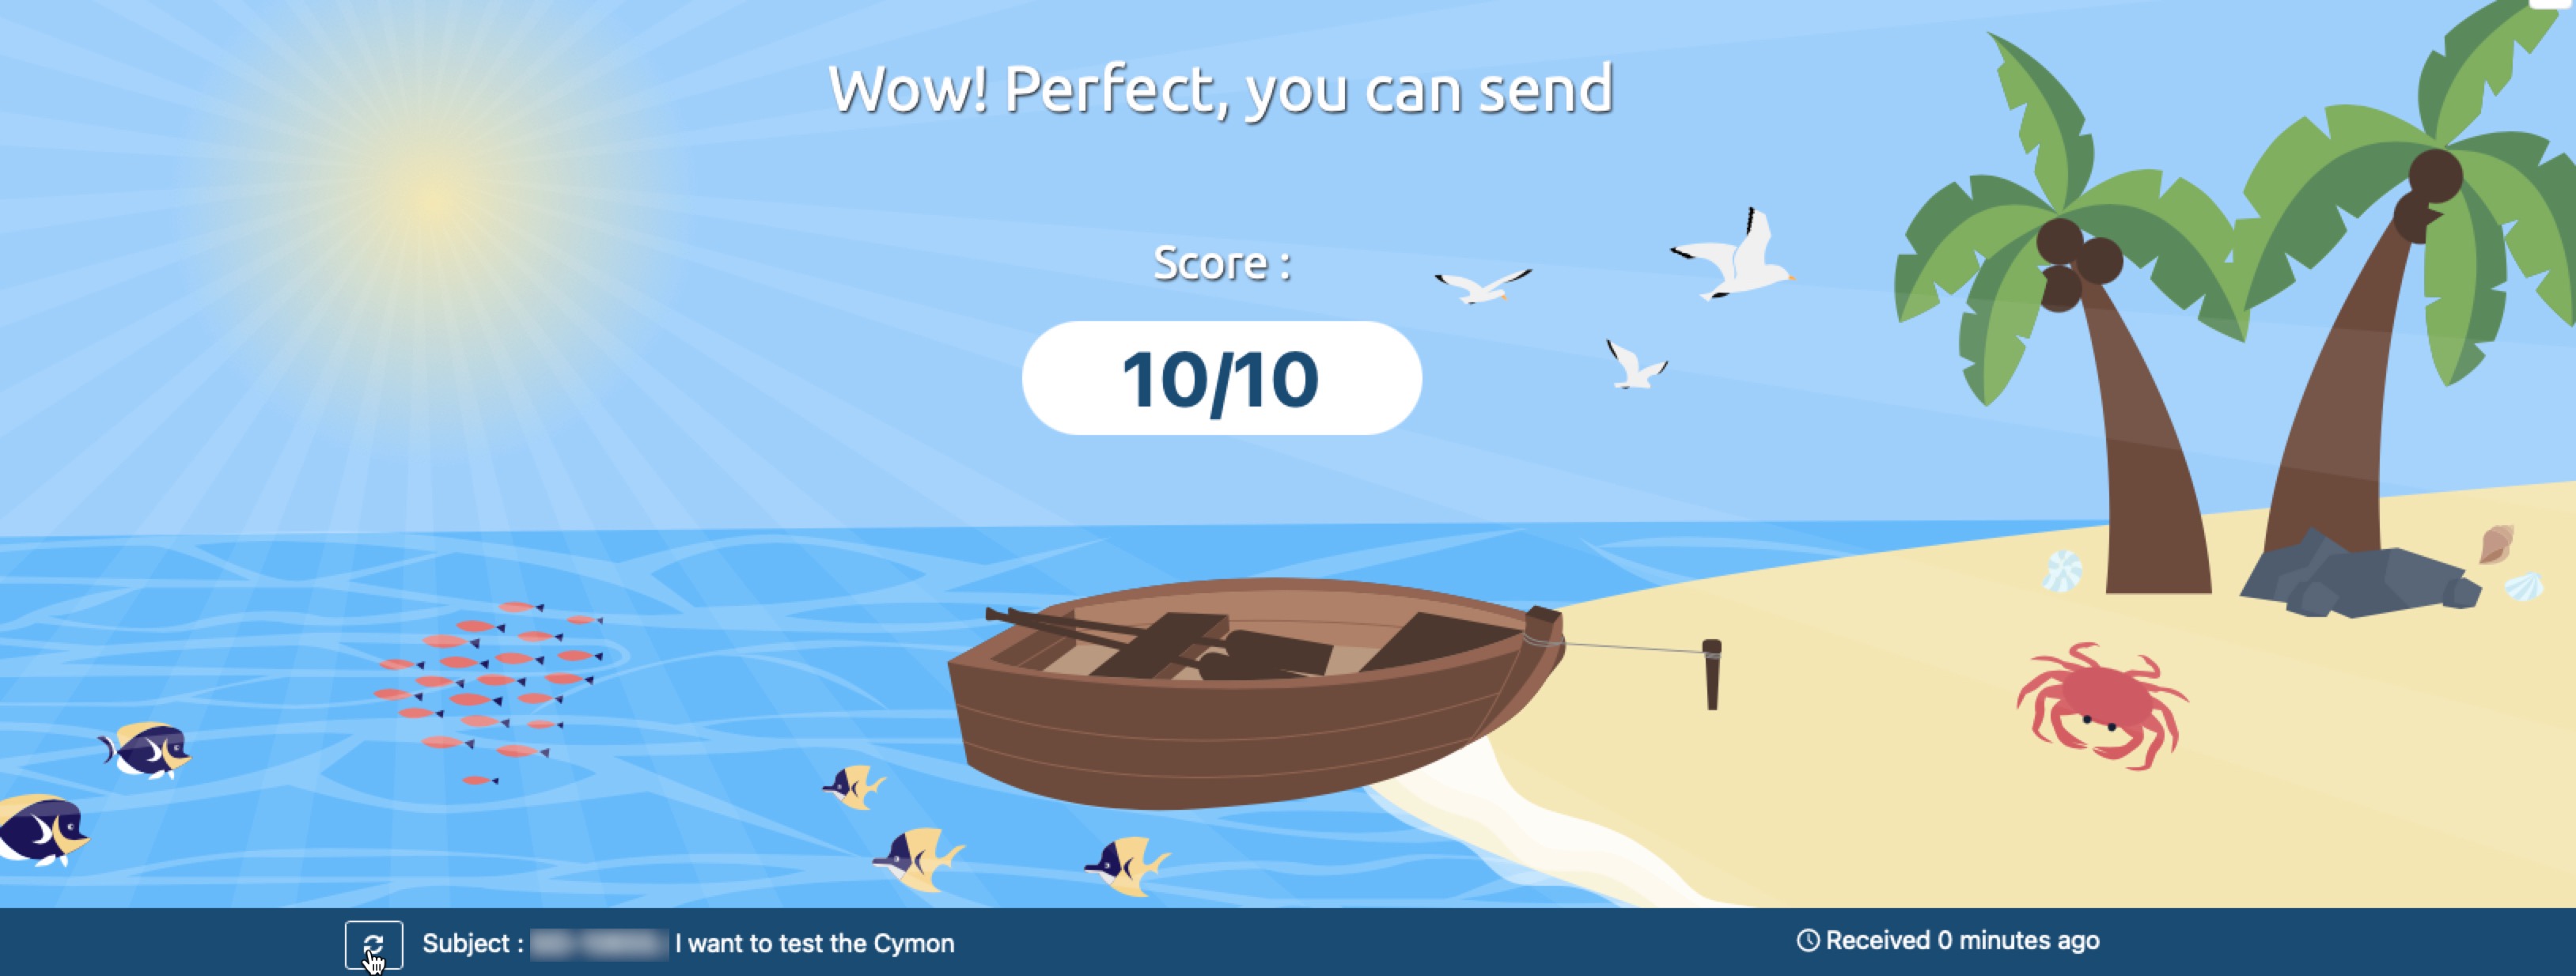 Image:spam score testing tool and tip how to increase your rating